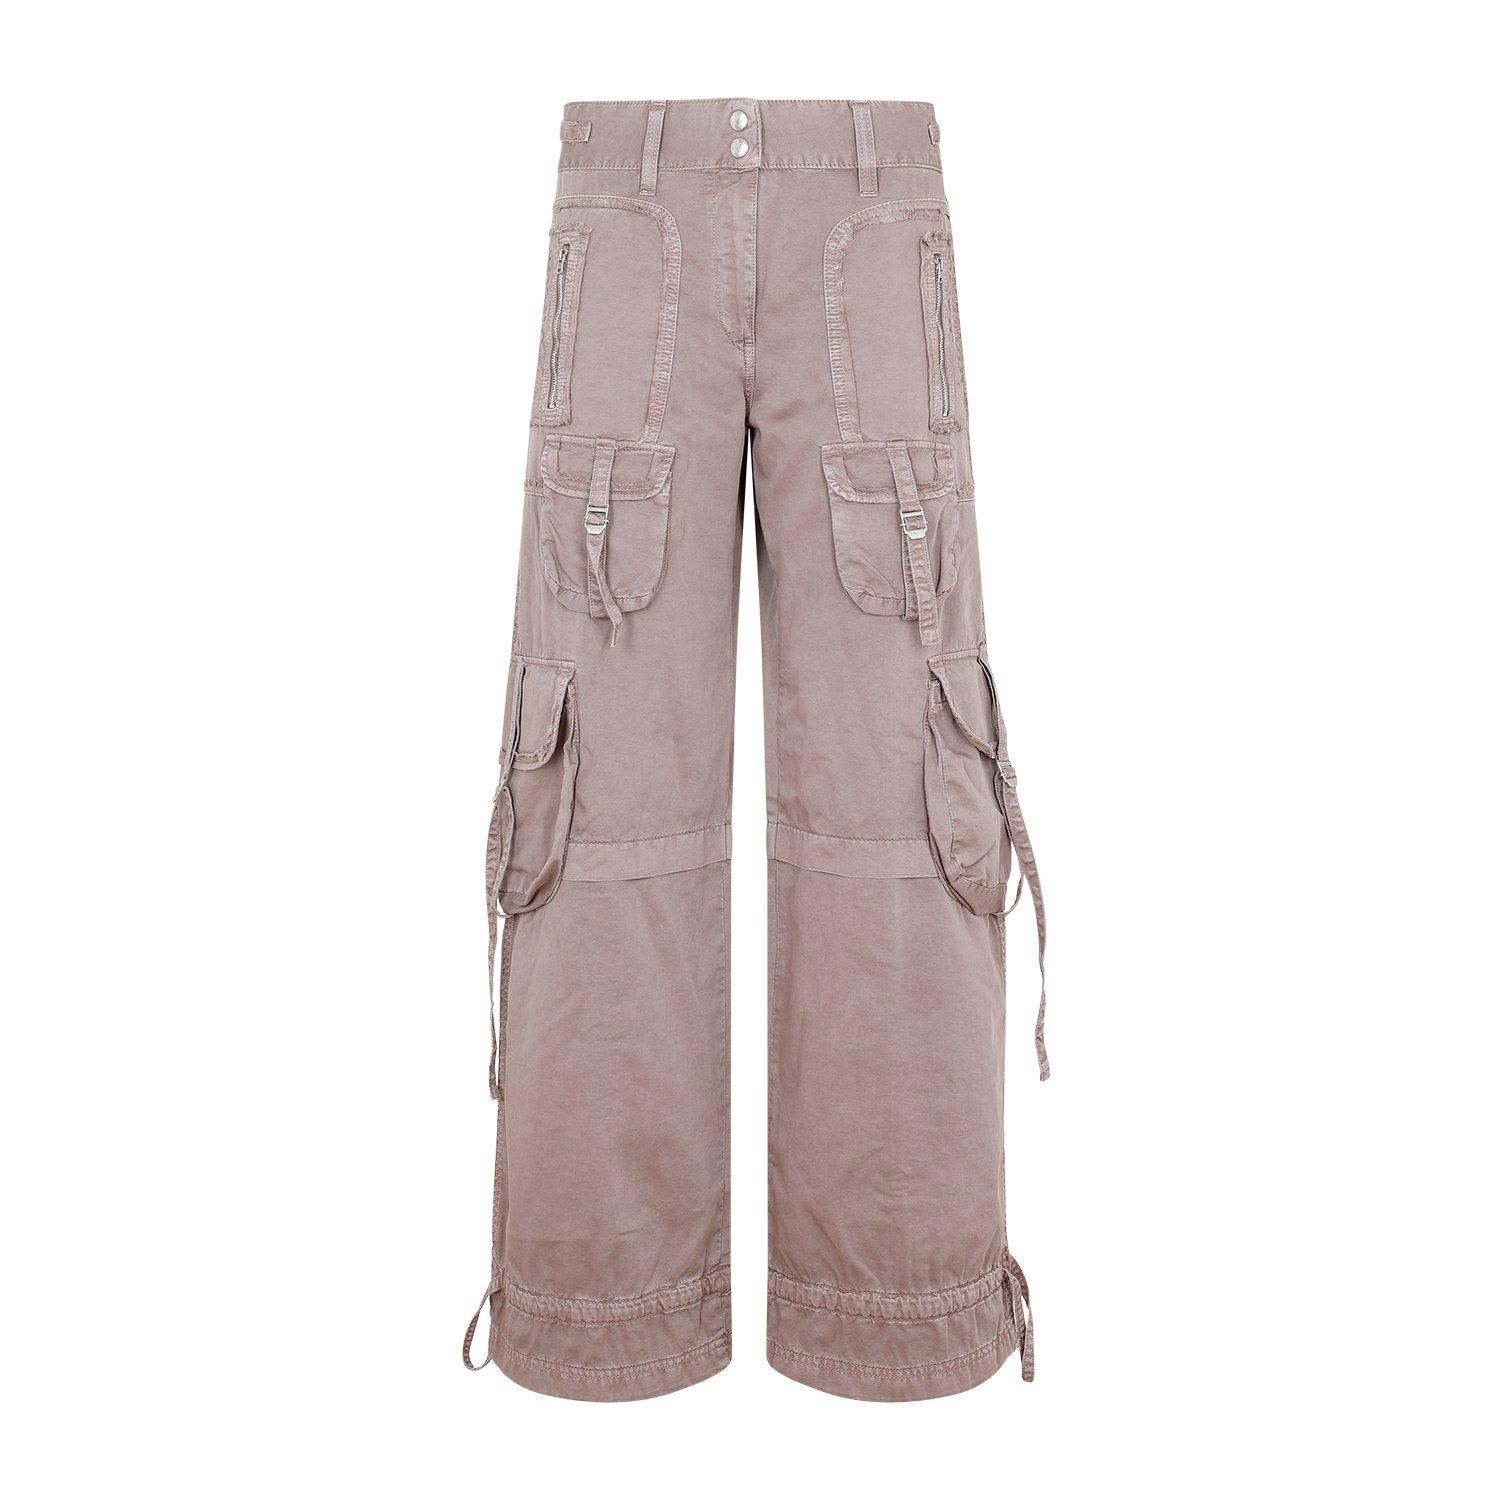 ACNE STUDIOS PANTS IN ROSE-PINK COTTON